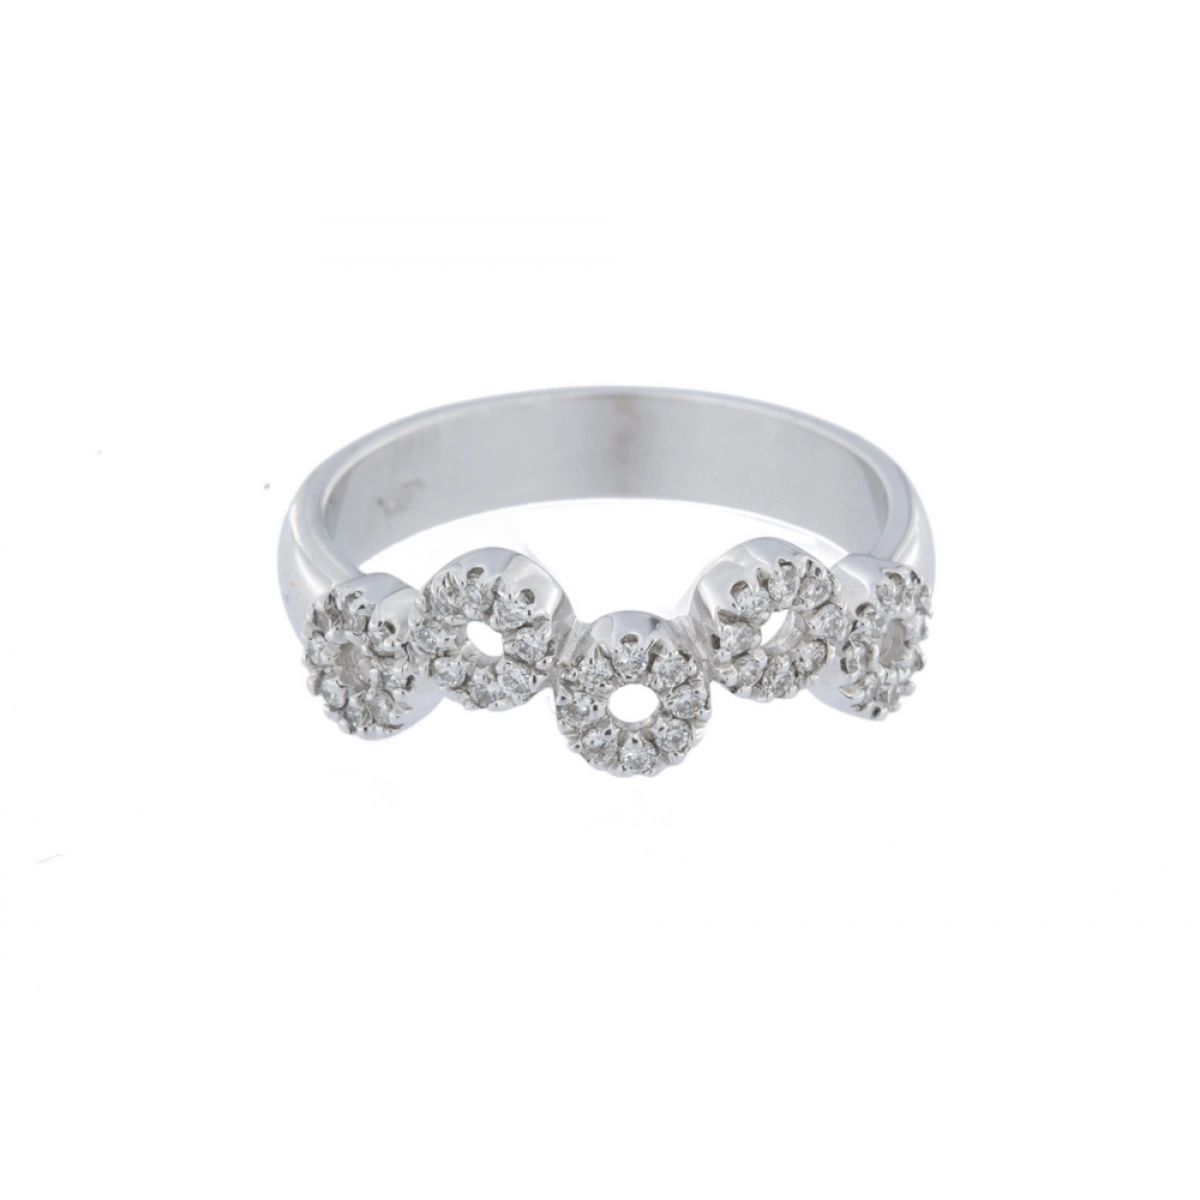 RING WHITE GOLD 18 K WITH 40 BRILLIANT